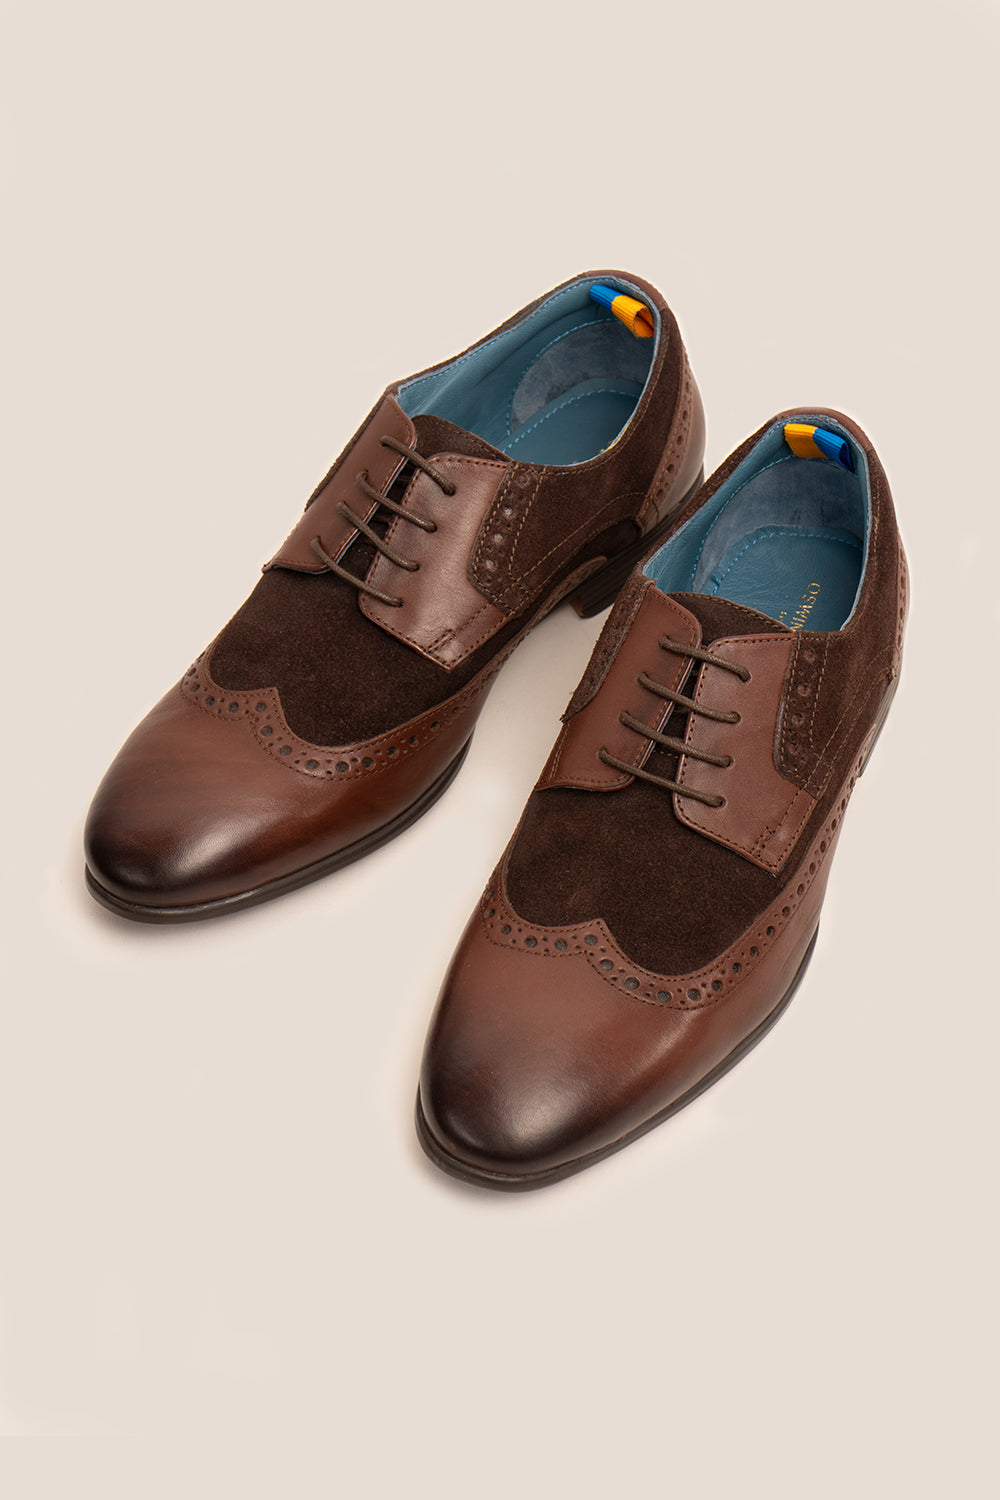 Miles Brown Leather/Suede Brogue Shoes Oswin Hyde